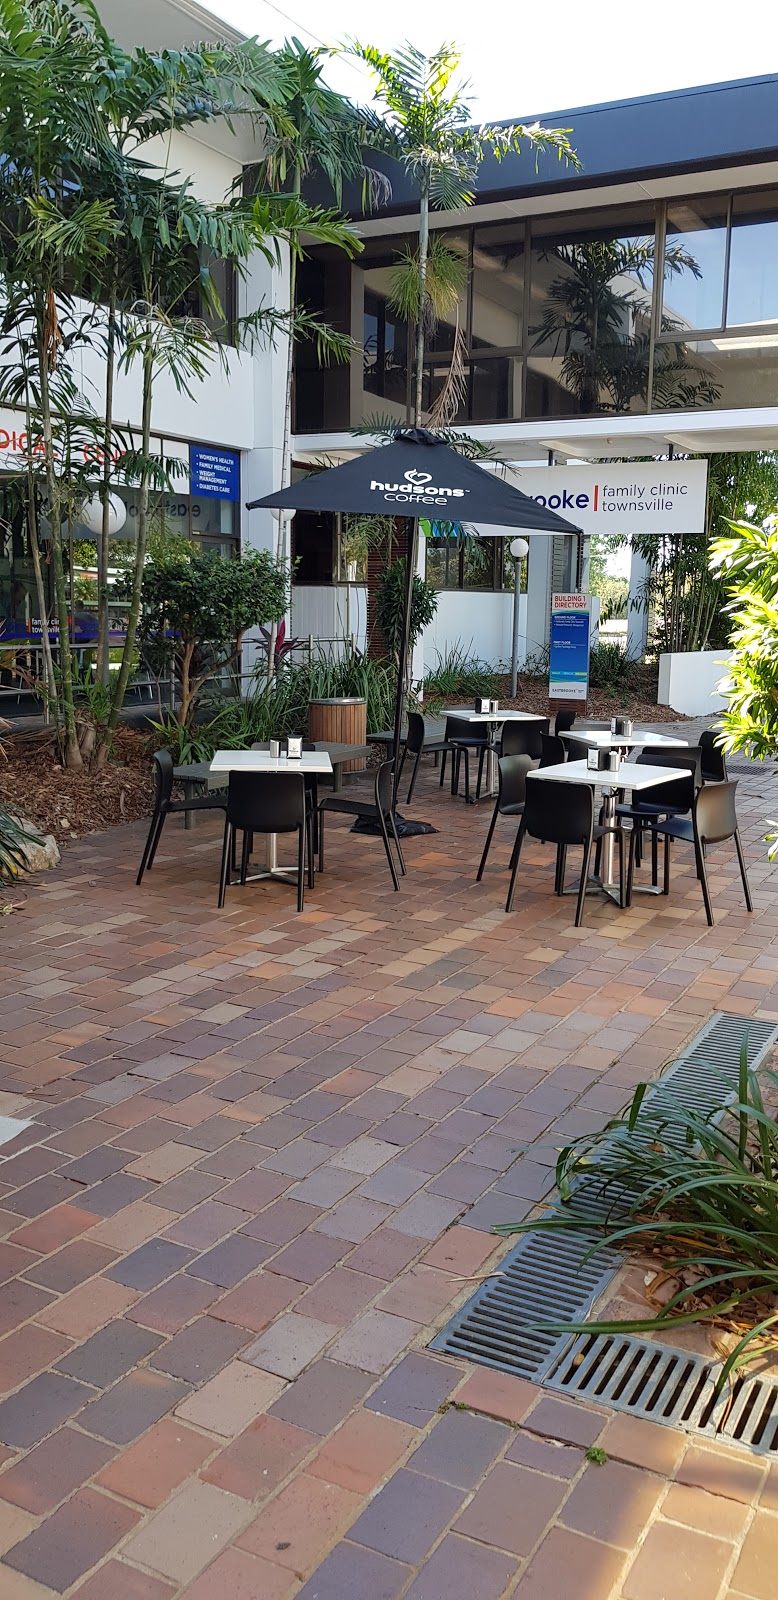 Hudsons Coffee Townsville | Building 1, Ground Floor, Cafe Tenancy, 86, Thuringowa Dr, Thuringowa Central QLD 4817, Australia | Phone: 0407 600 214